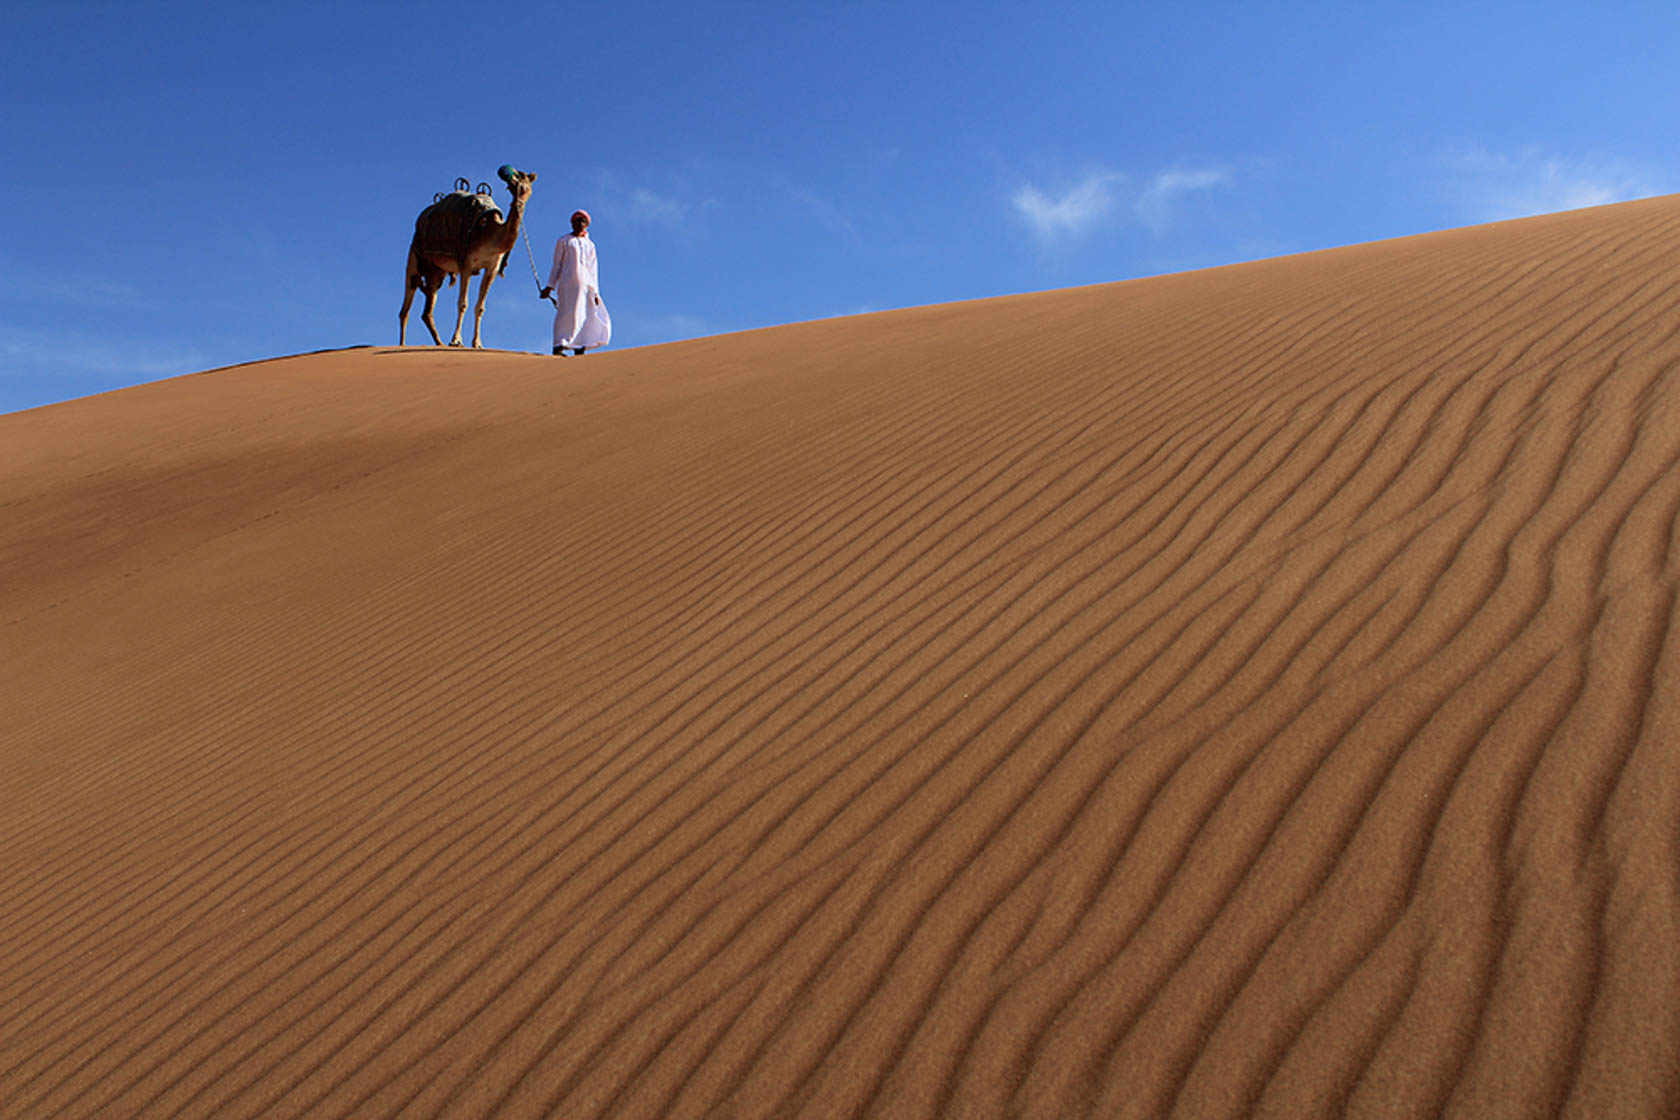 Man leading a camel across the sand dunes taken with Canon EOS 1300D DSLR camera